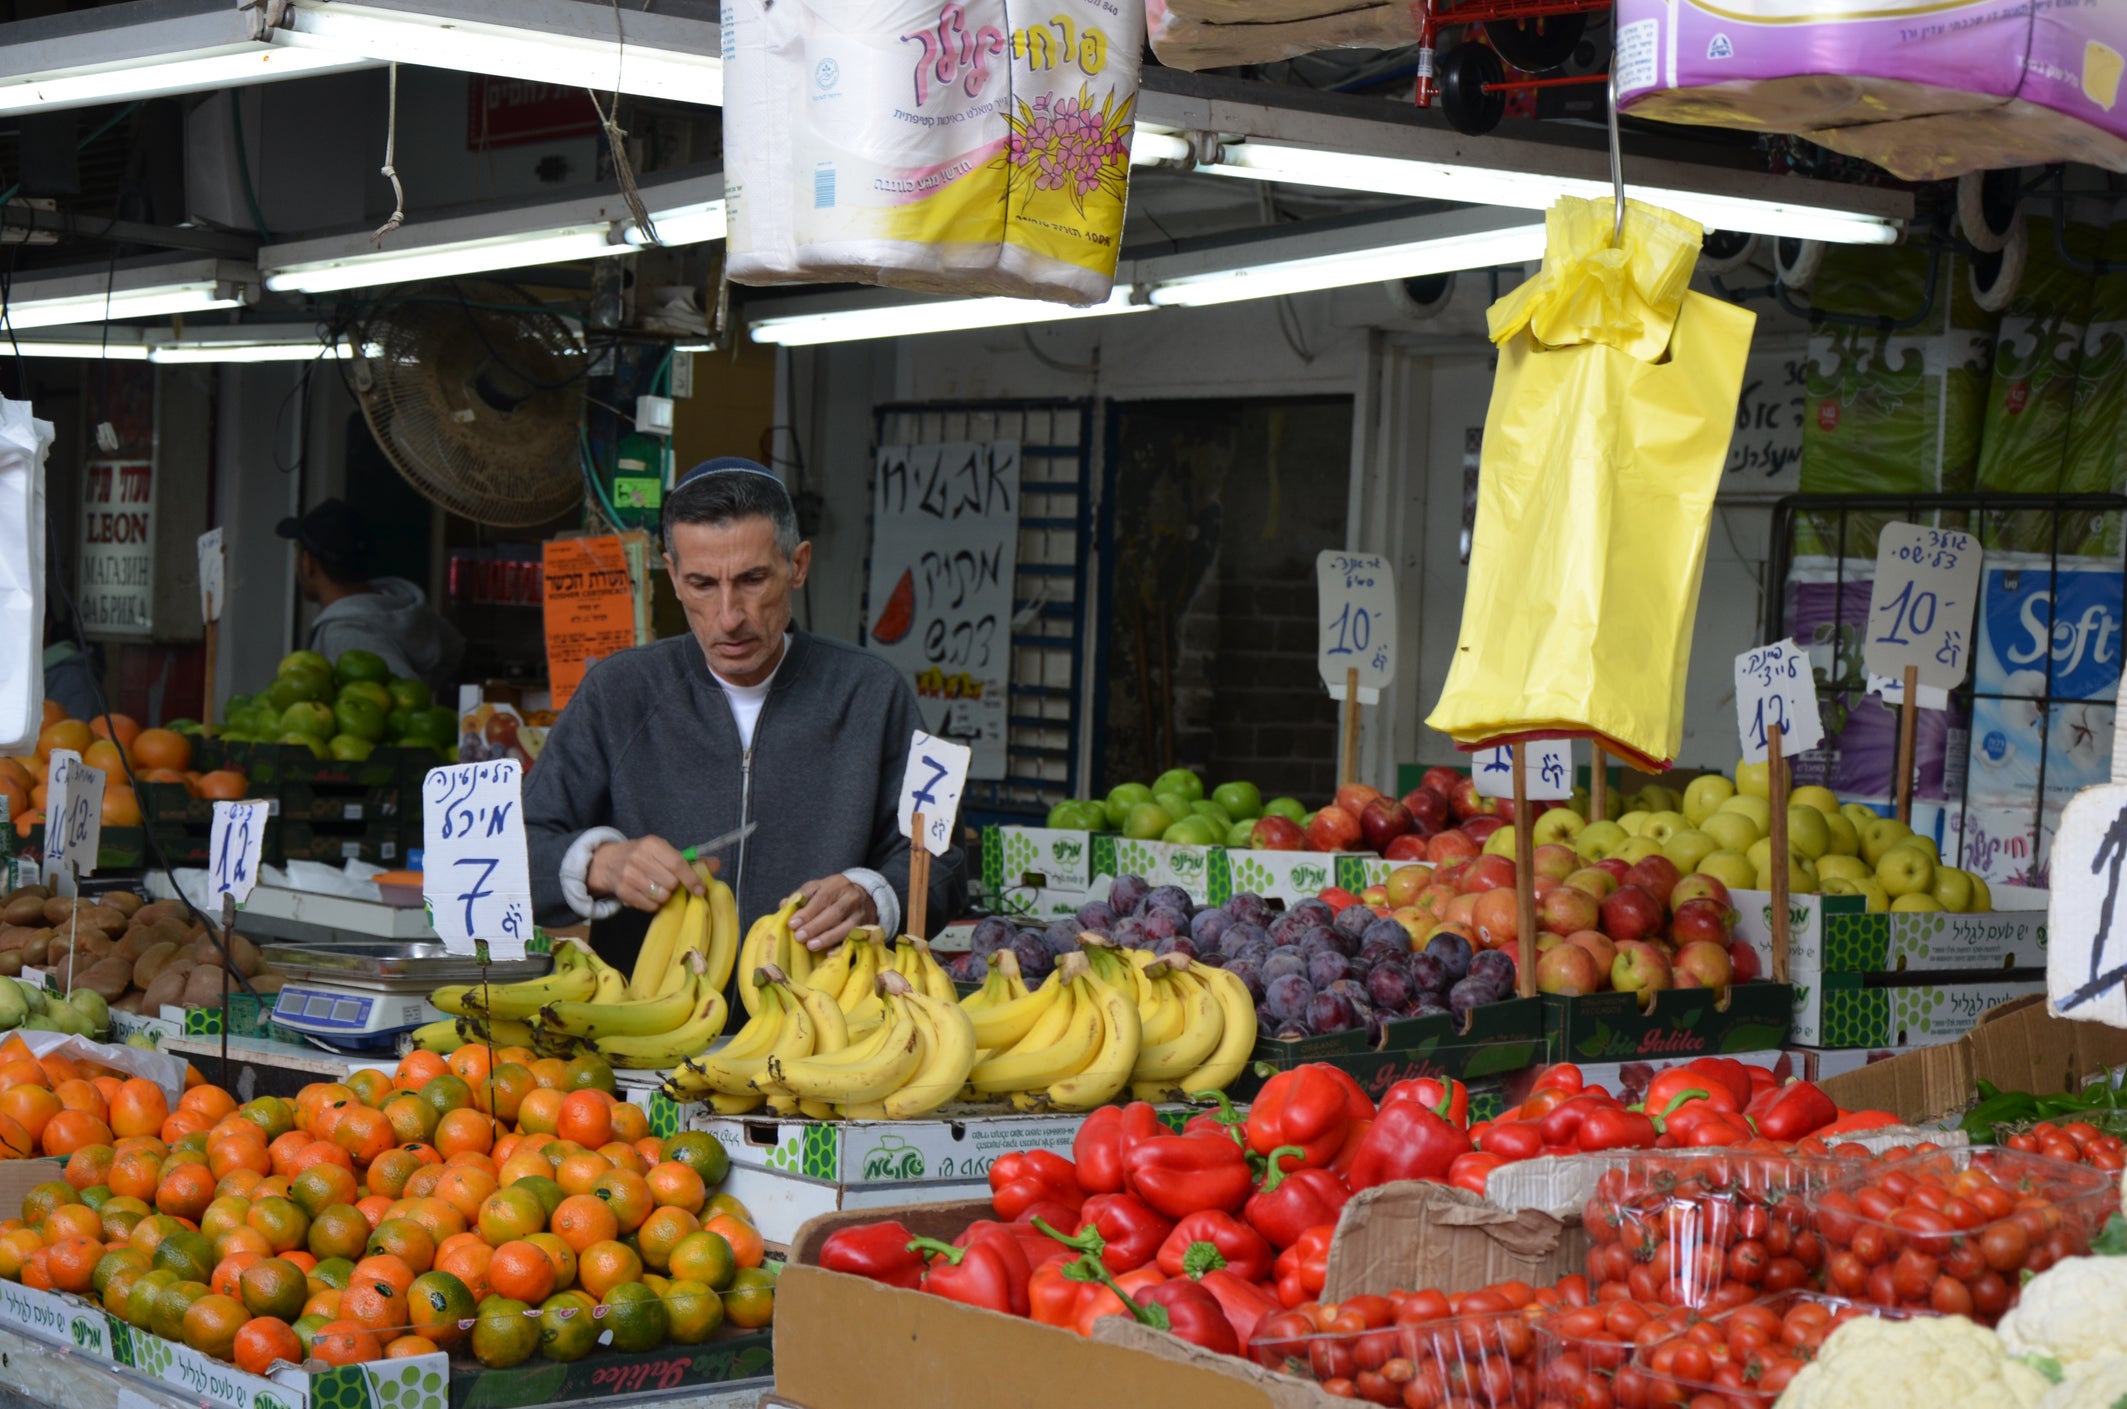 Carmel Market is one of Tel Aviv’s most exciting foodie spots